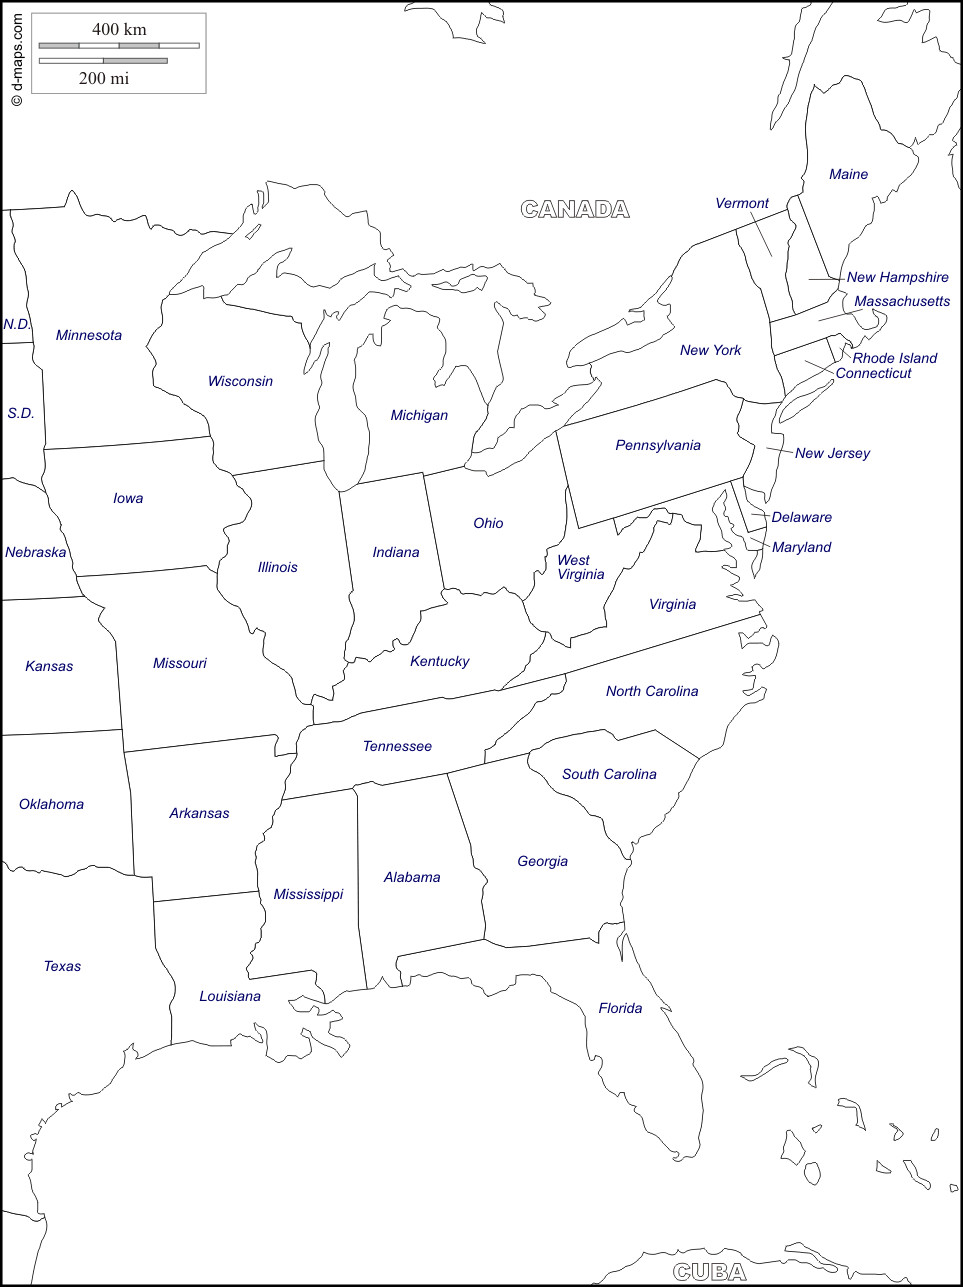 Large Print Map Of The United States Luxury East Coast Of The United States Free Map Free Blank Map Free